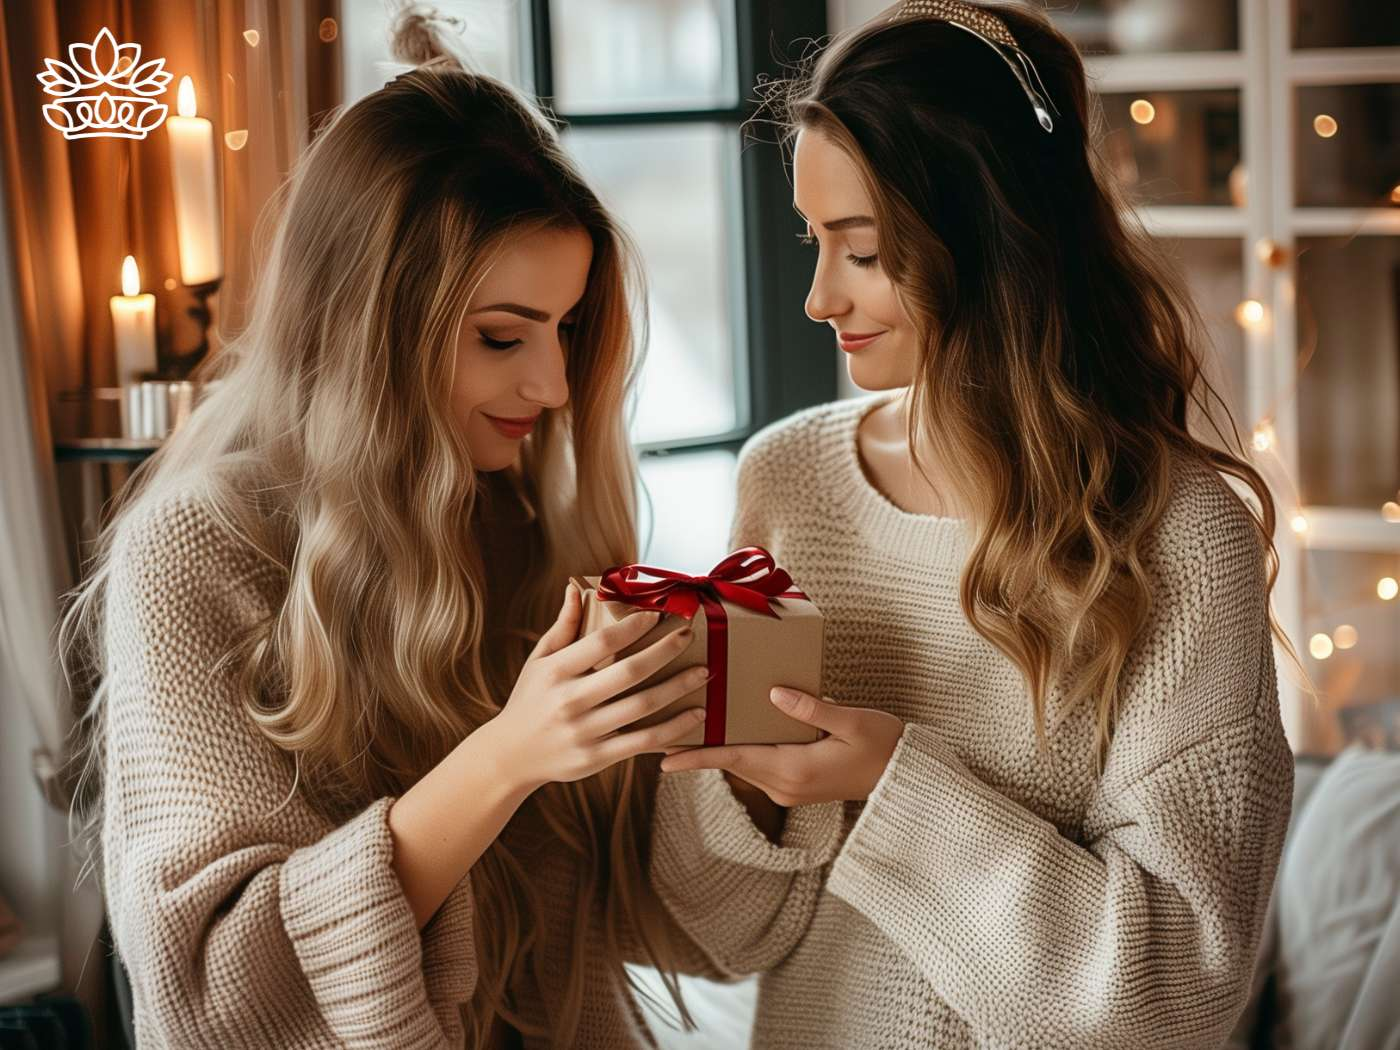 A tender moment as one woman presents her partner with a gift box tied with a red ribbon, encapsulating the spirit of giving synonymous with Fabulous Flowers and Gifts.